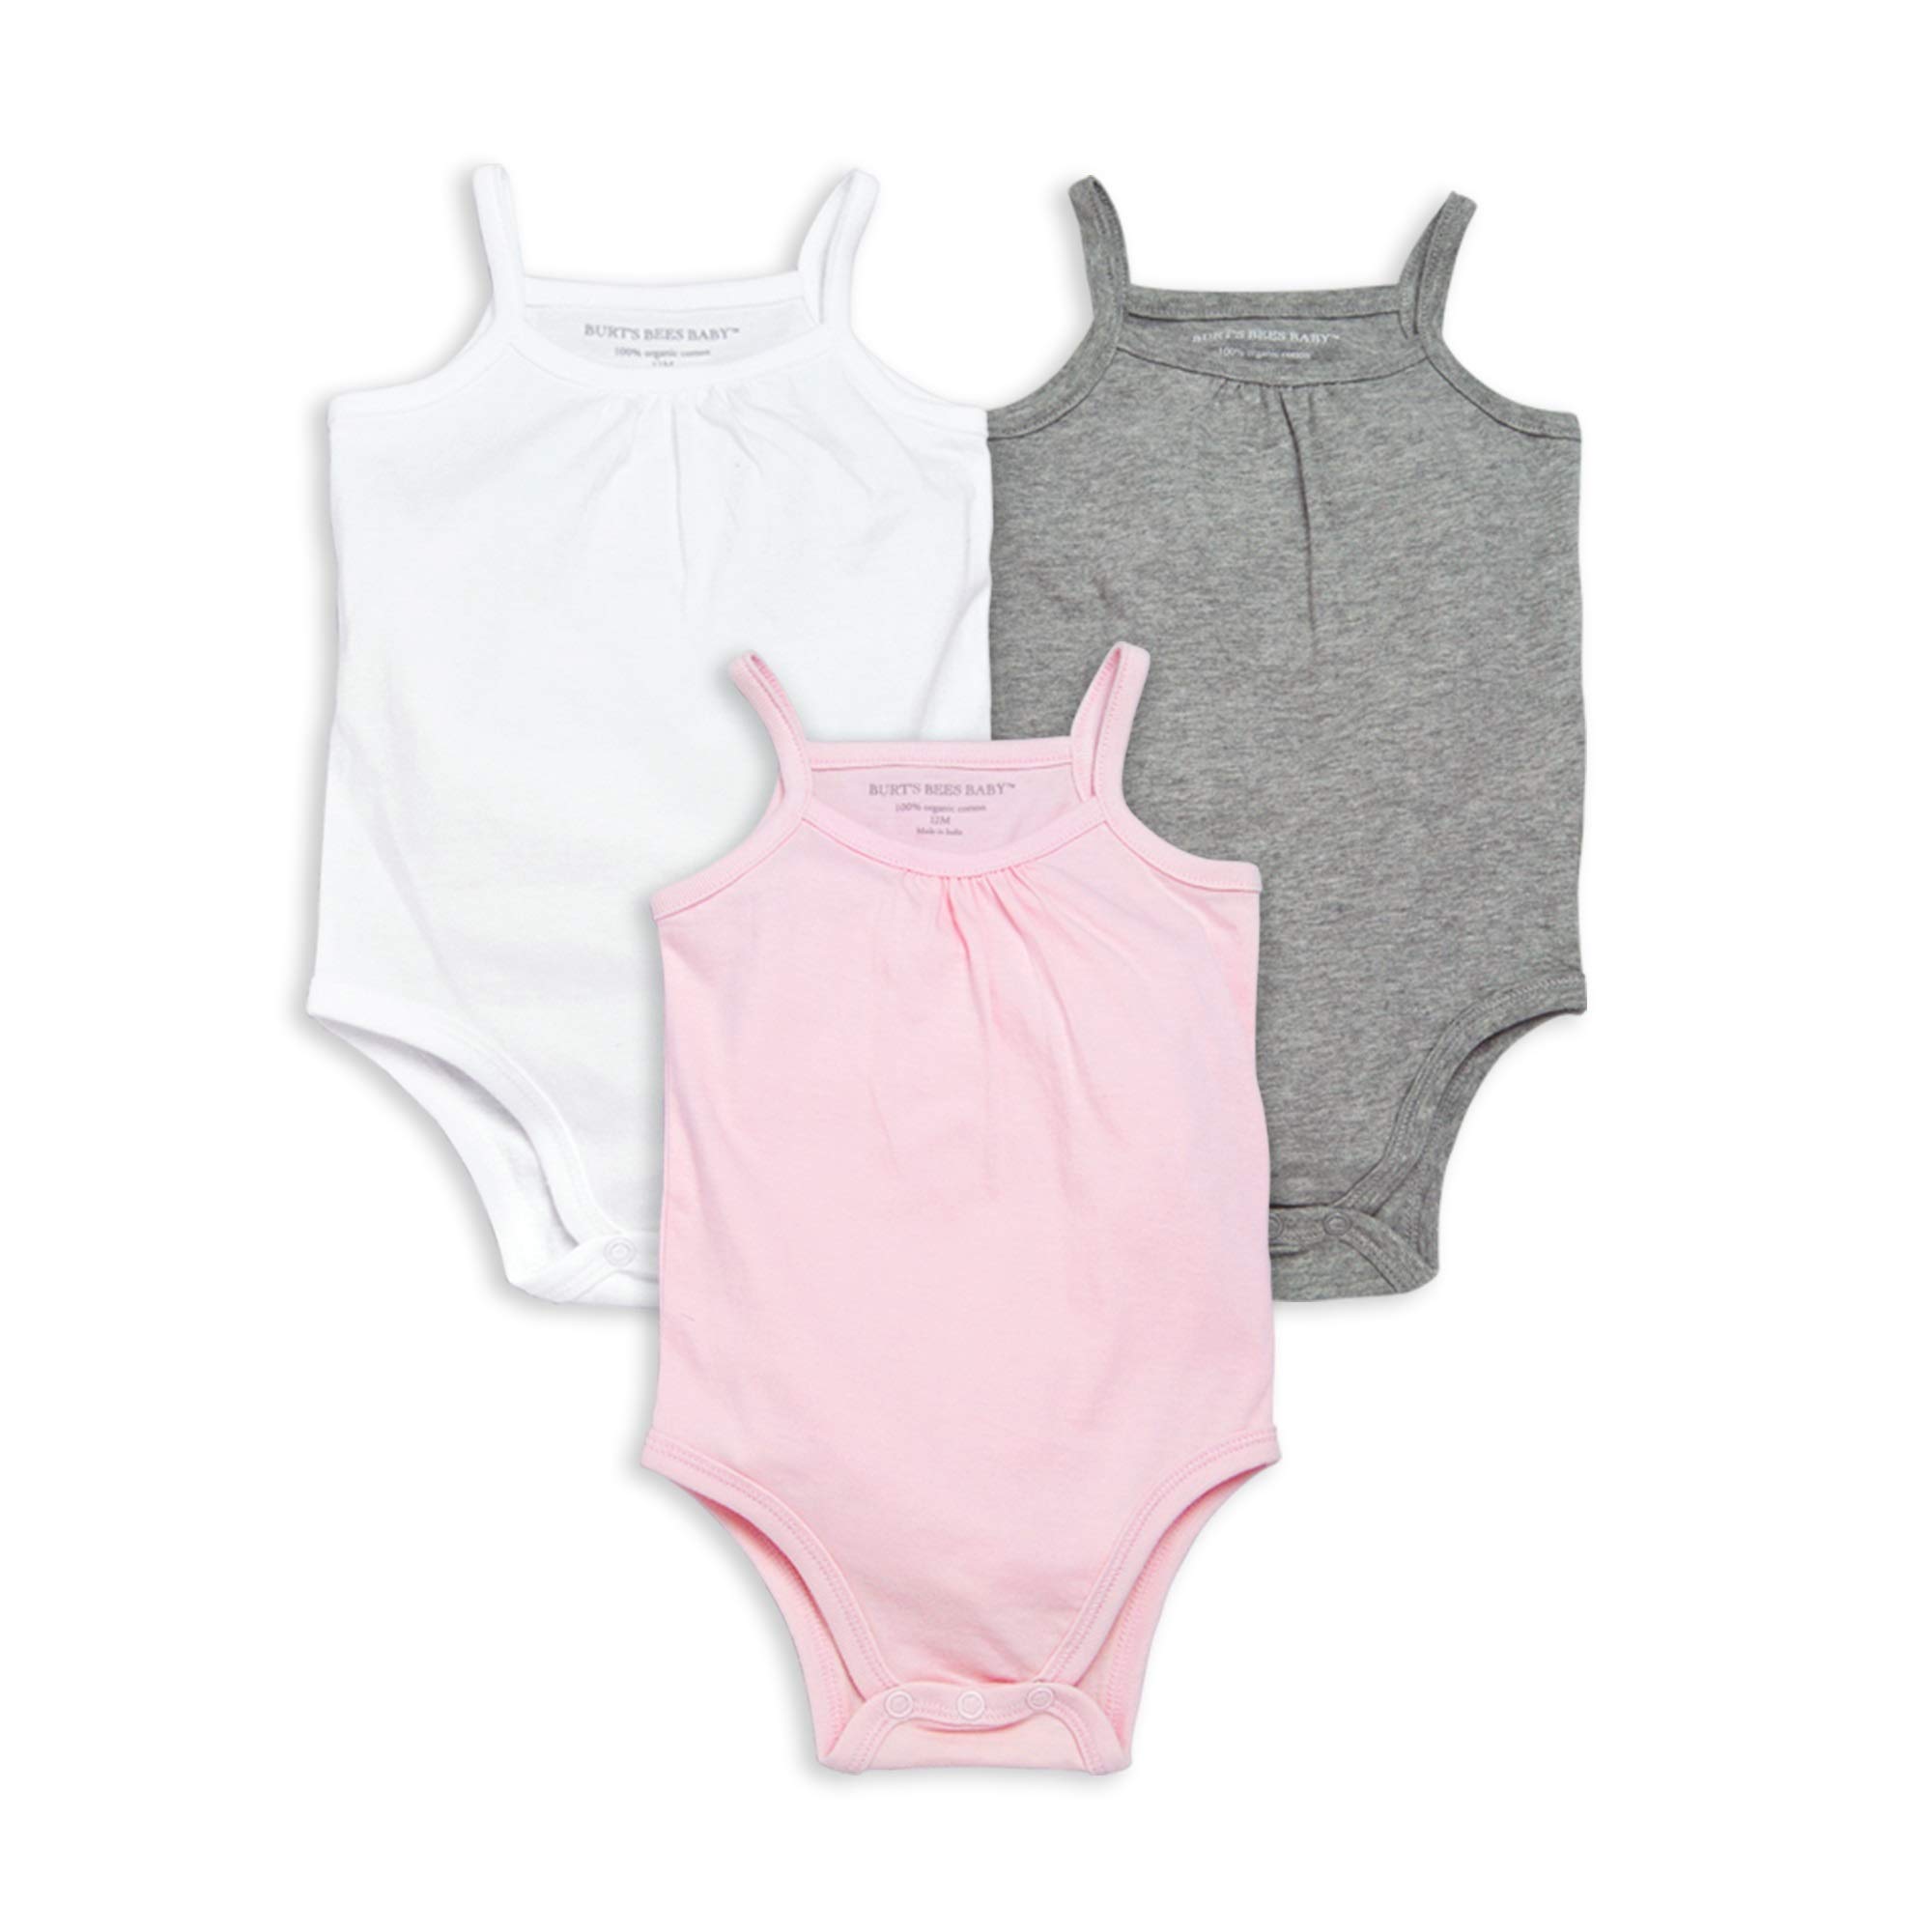 Burt's Bees Baby Baby Bodysuits, 3-Pack Long & Short-Sleeve One-Pieces, 100% Organic Cotton